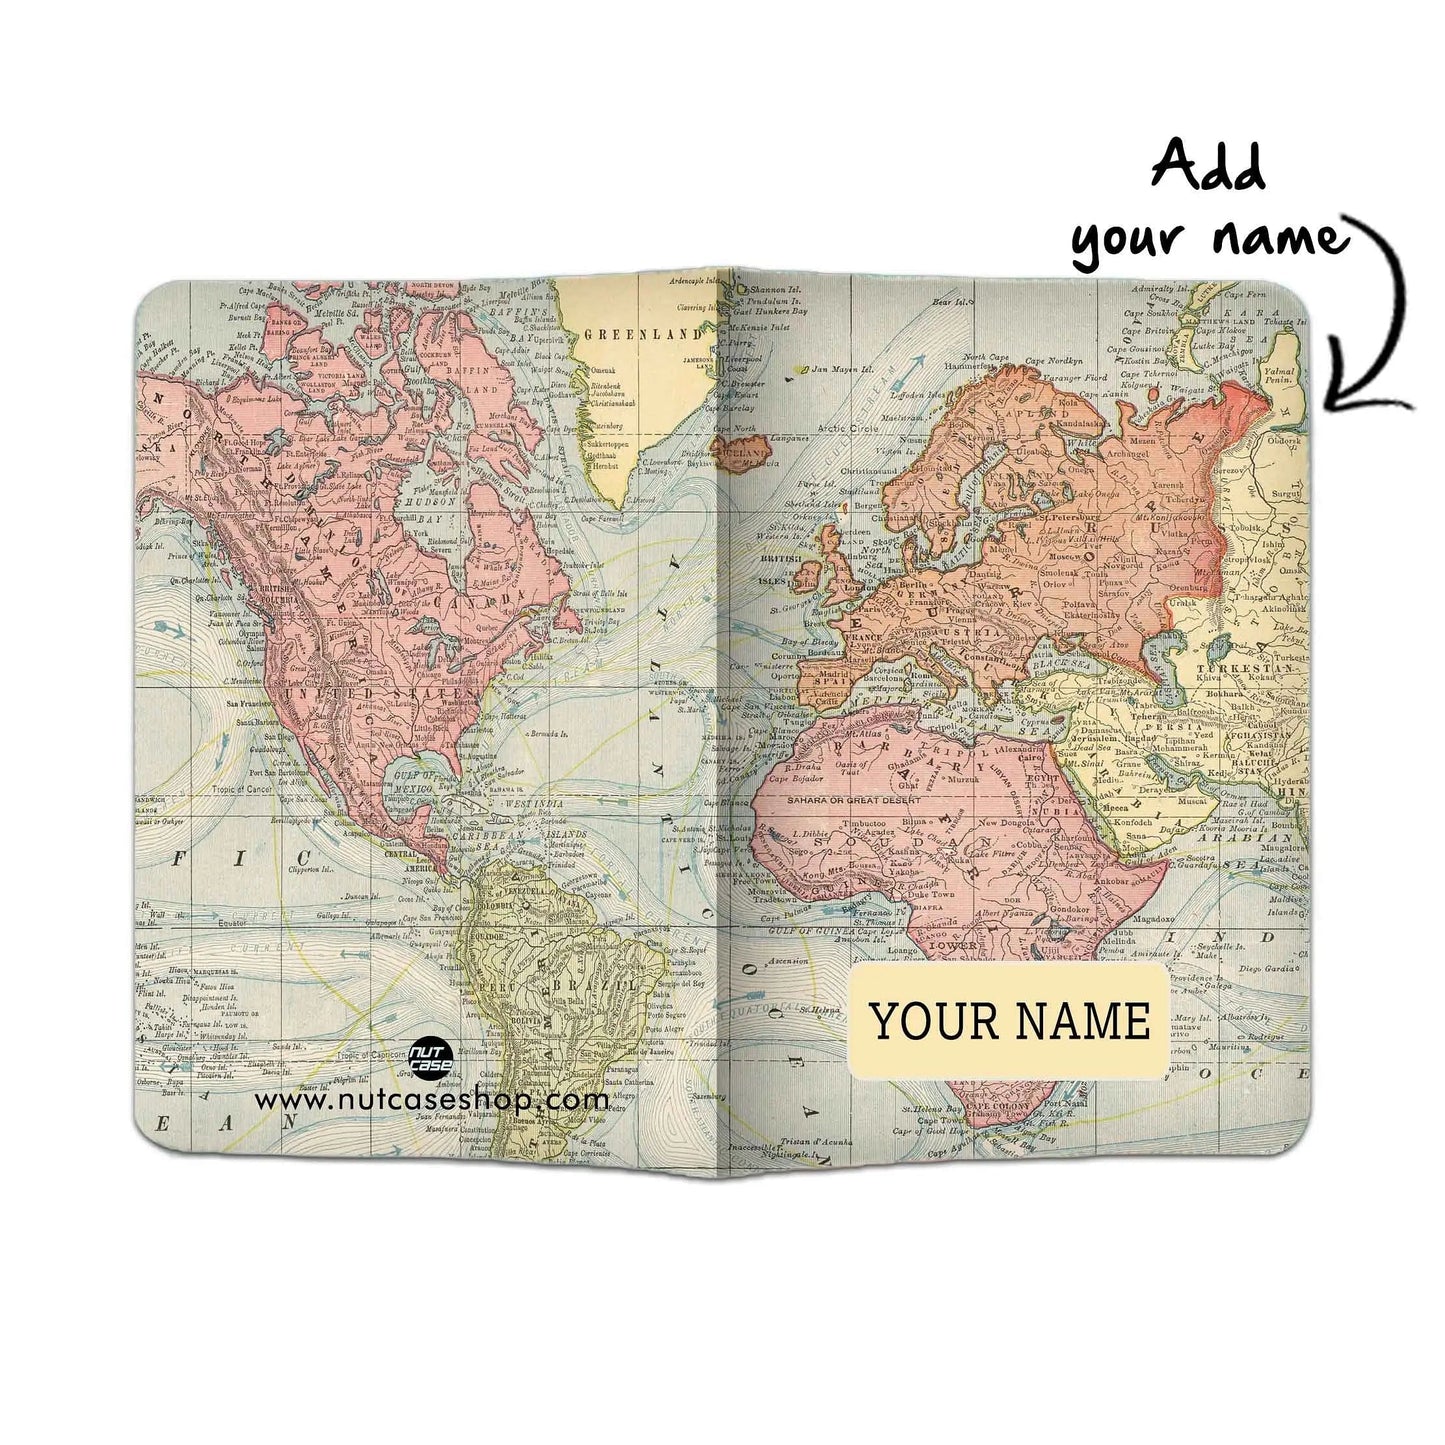 Customized Passport Holder Gifts for him under 500 - Vintage Map - Nutcase